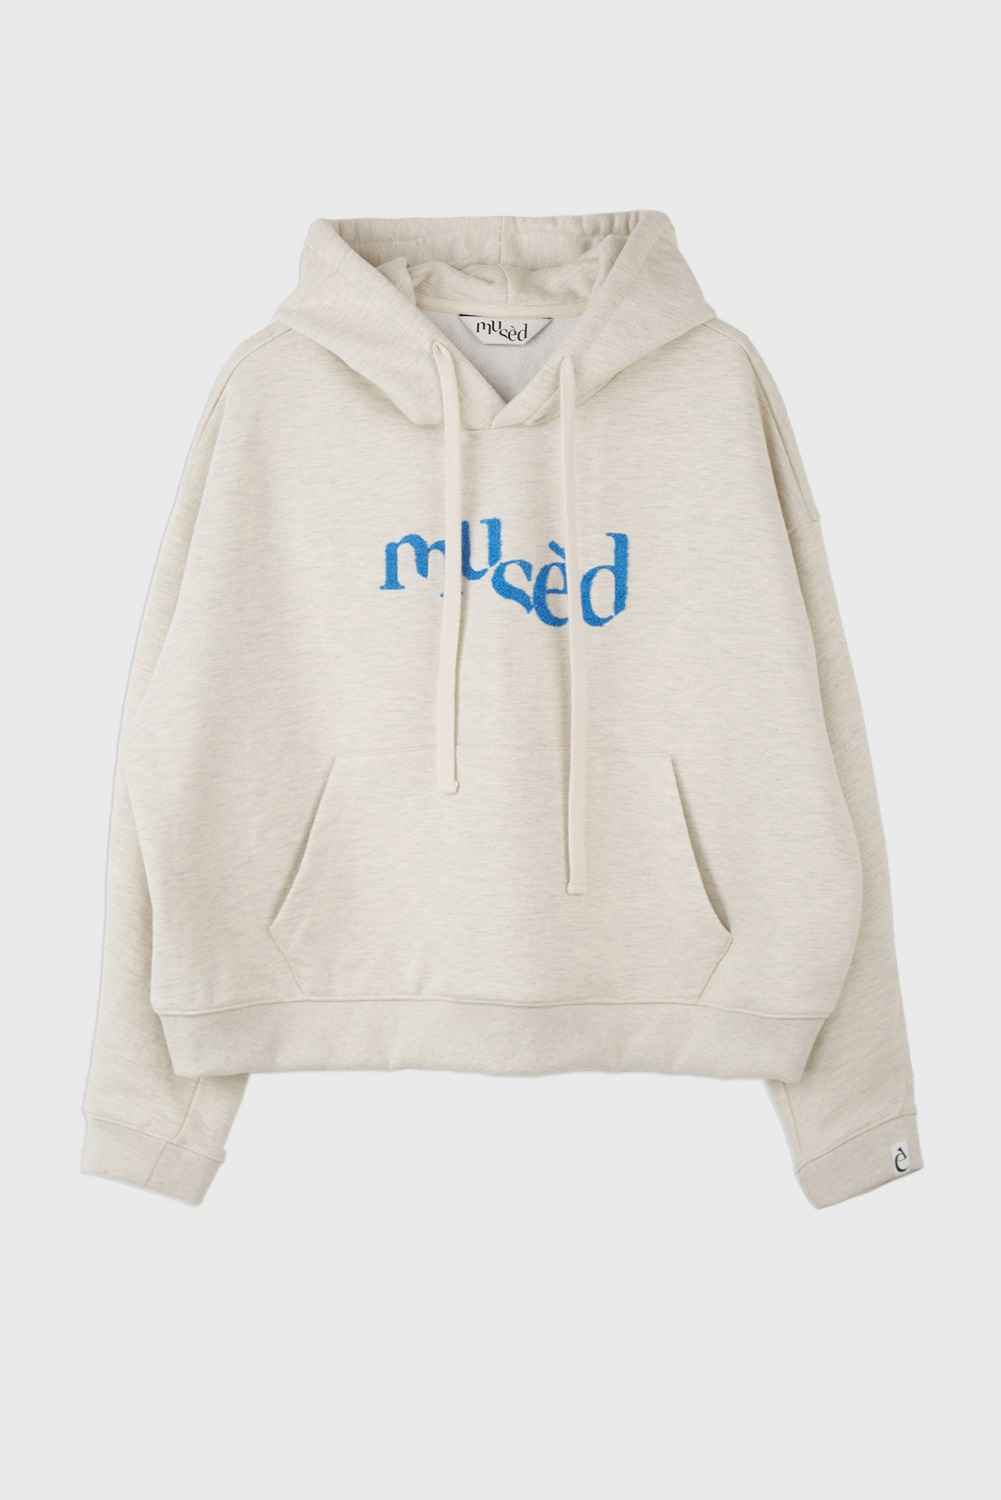 Mused Embroidery Logo Hoodie - Oatmeal